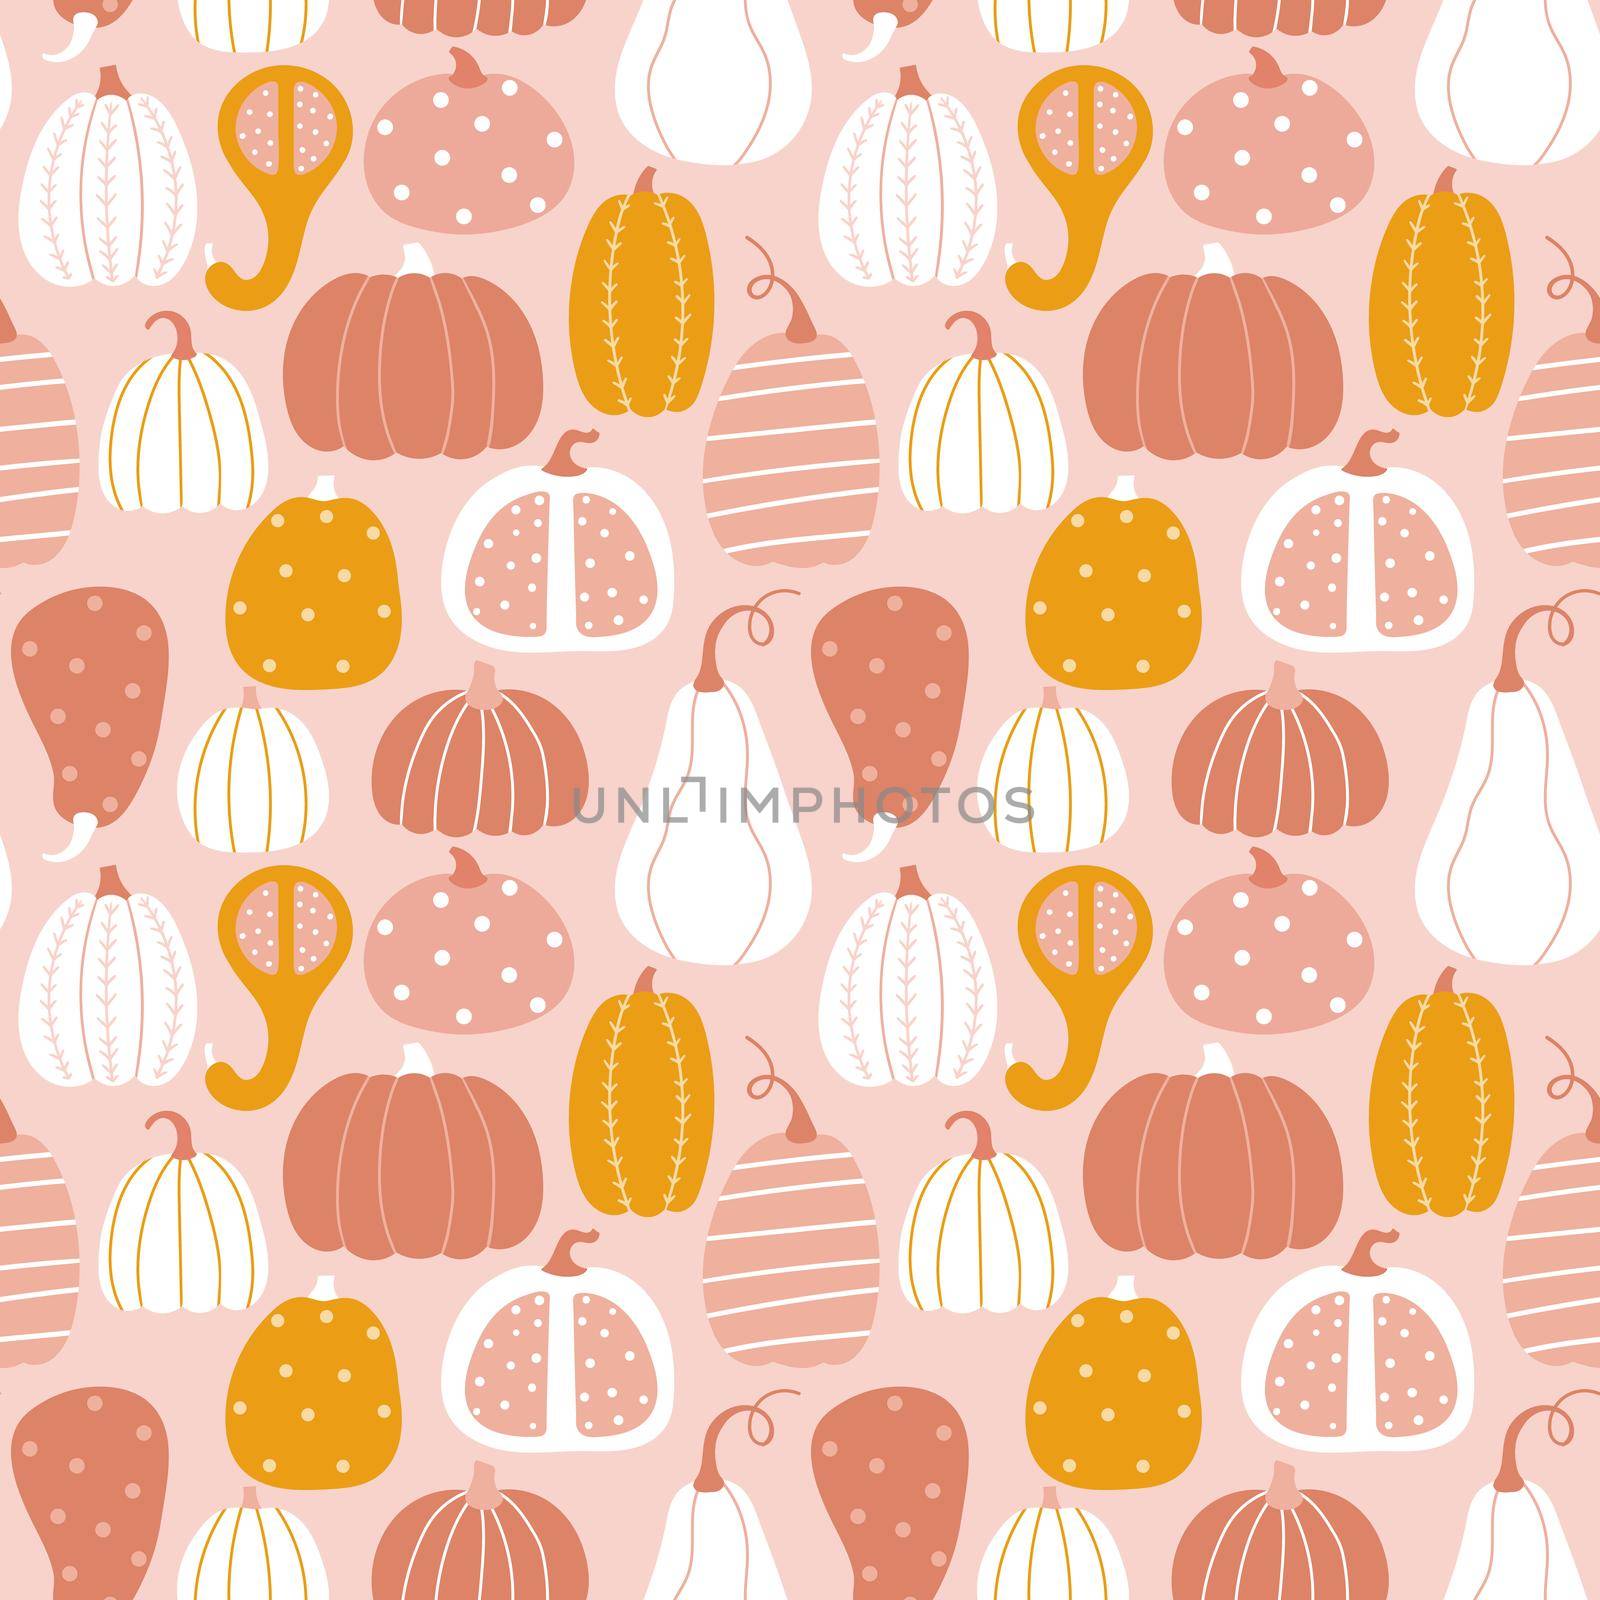 Vector autumn texture in flat style on a light pink background. Design for autumn holidays